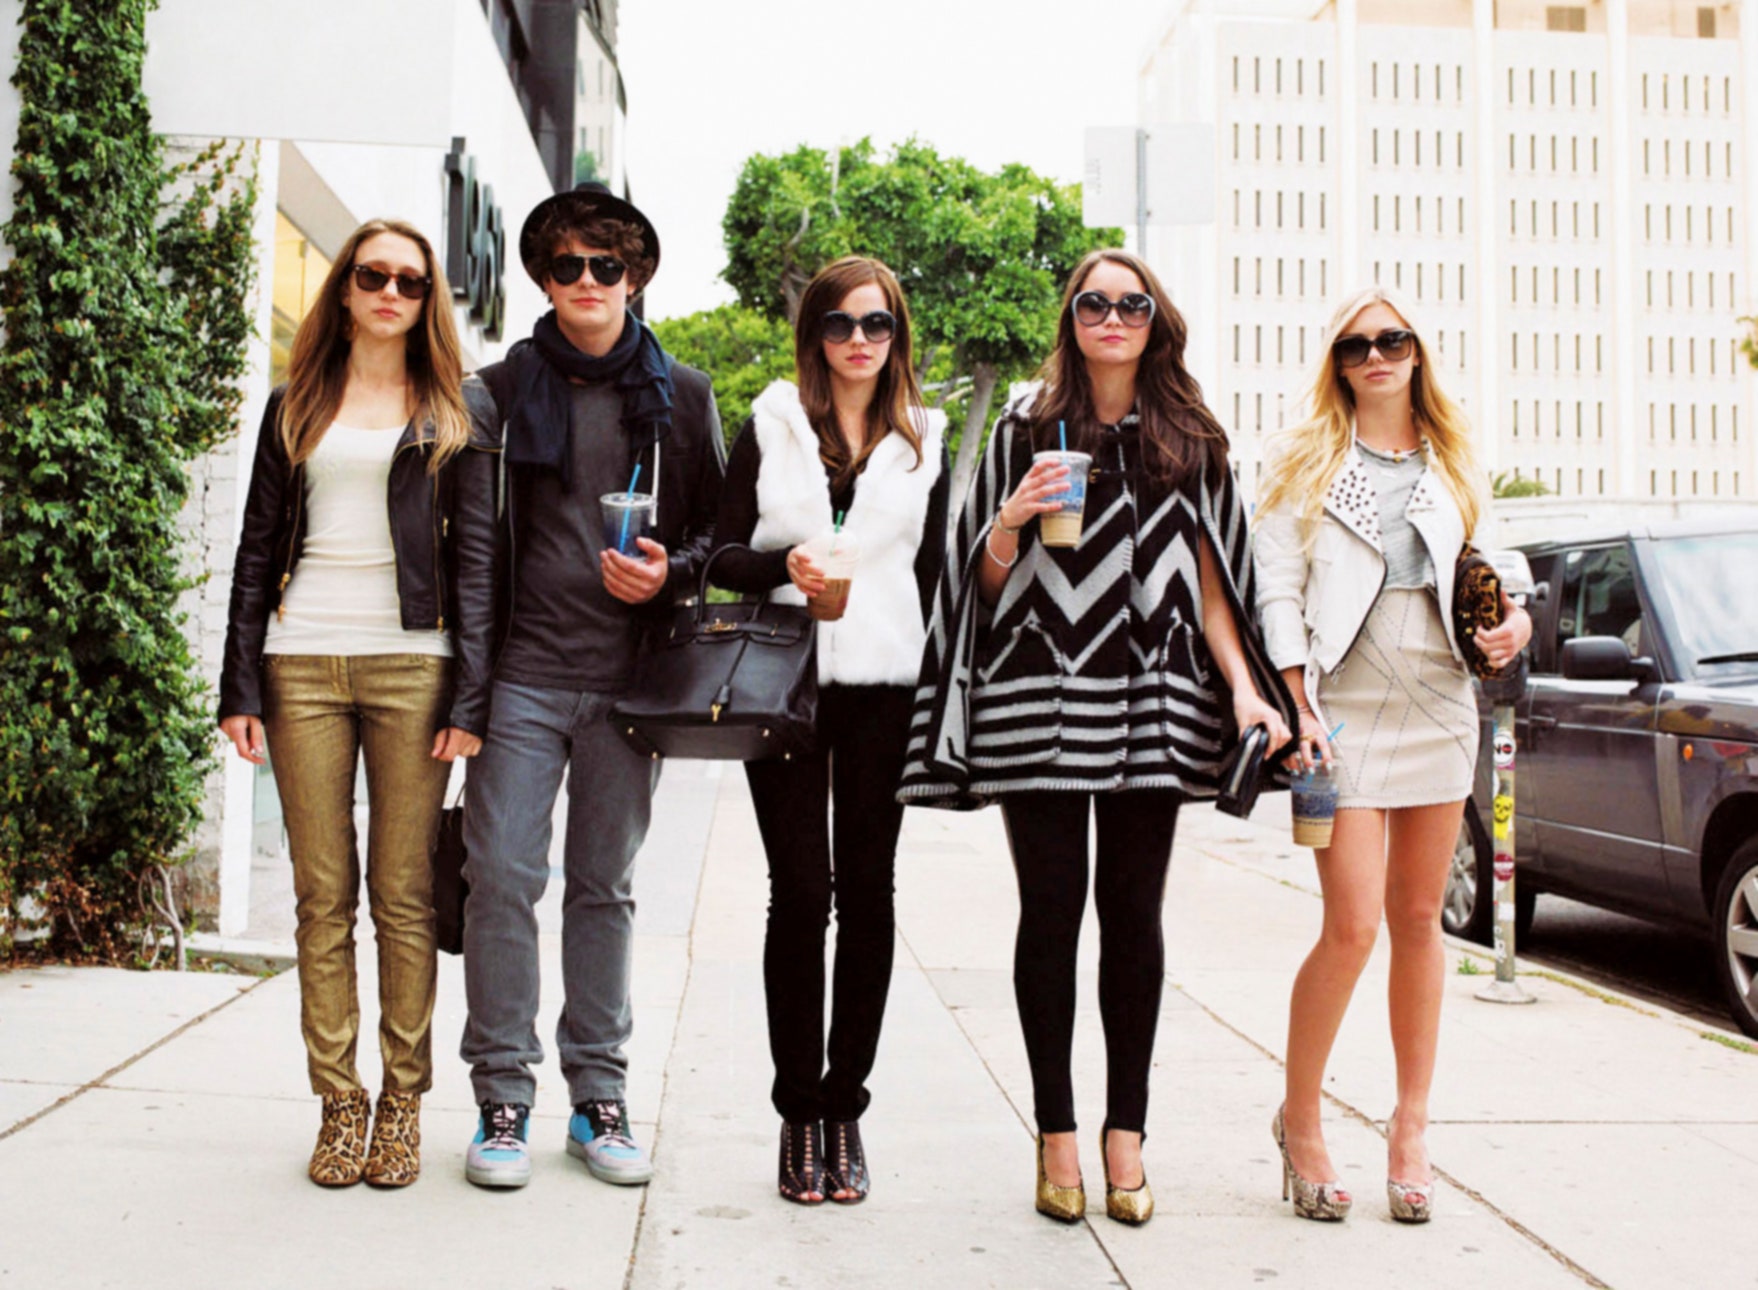 38 Strategies I Had While Rewatching ‘The Bling Ring’